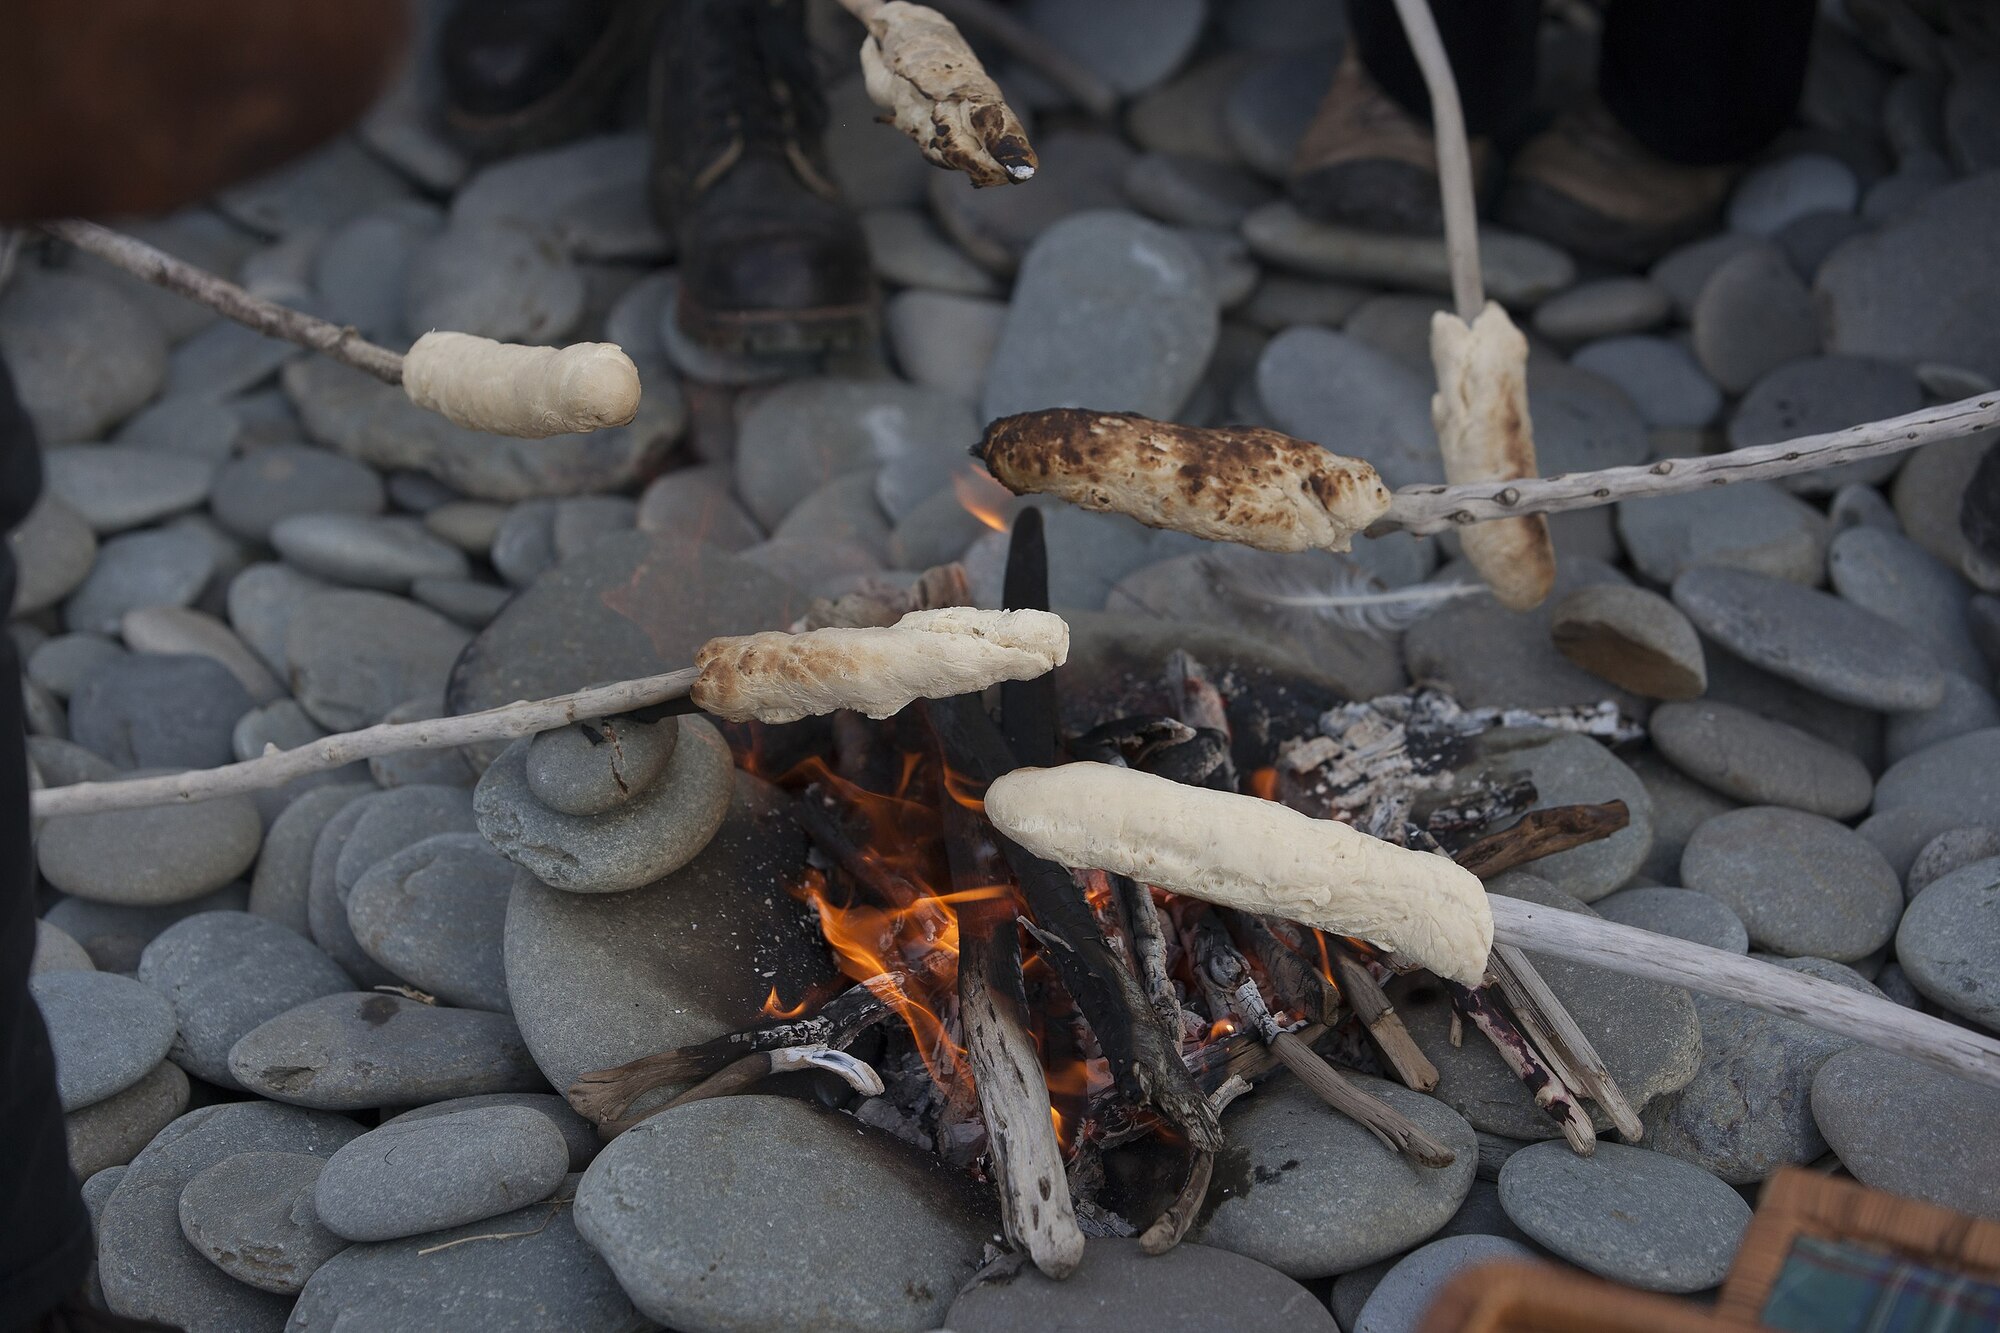 Photograph of small sticks of damper bread being cooked on wood sticks held over hot coals in a fire pit.